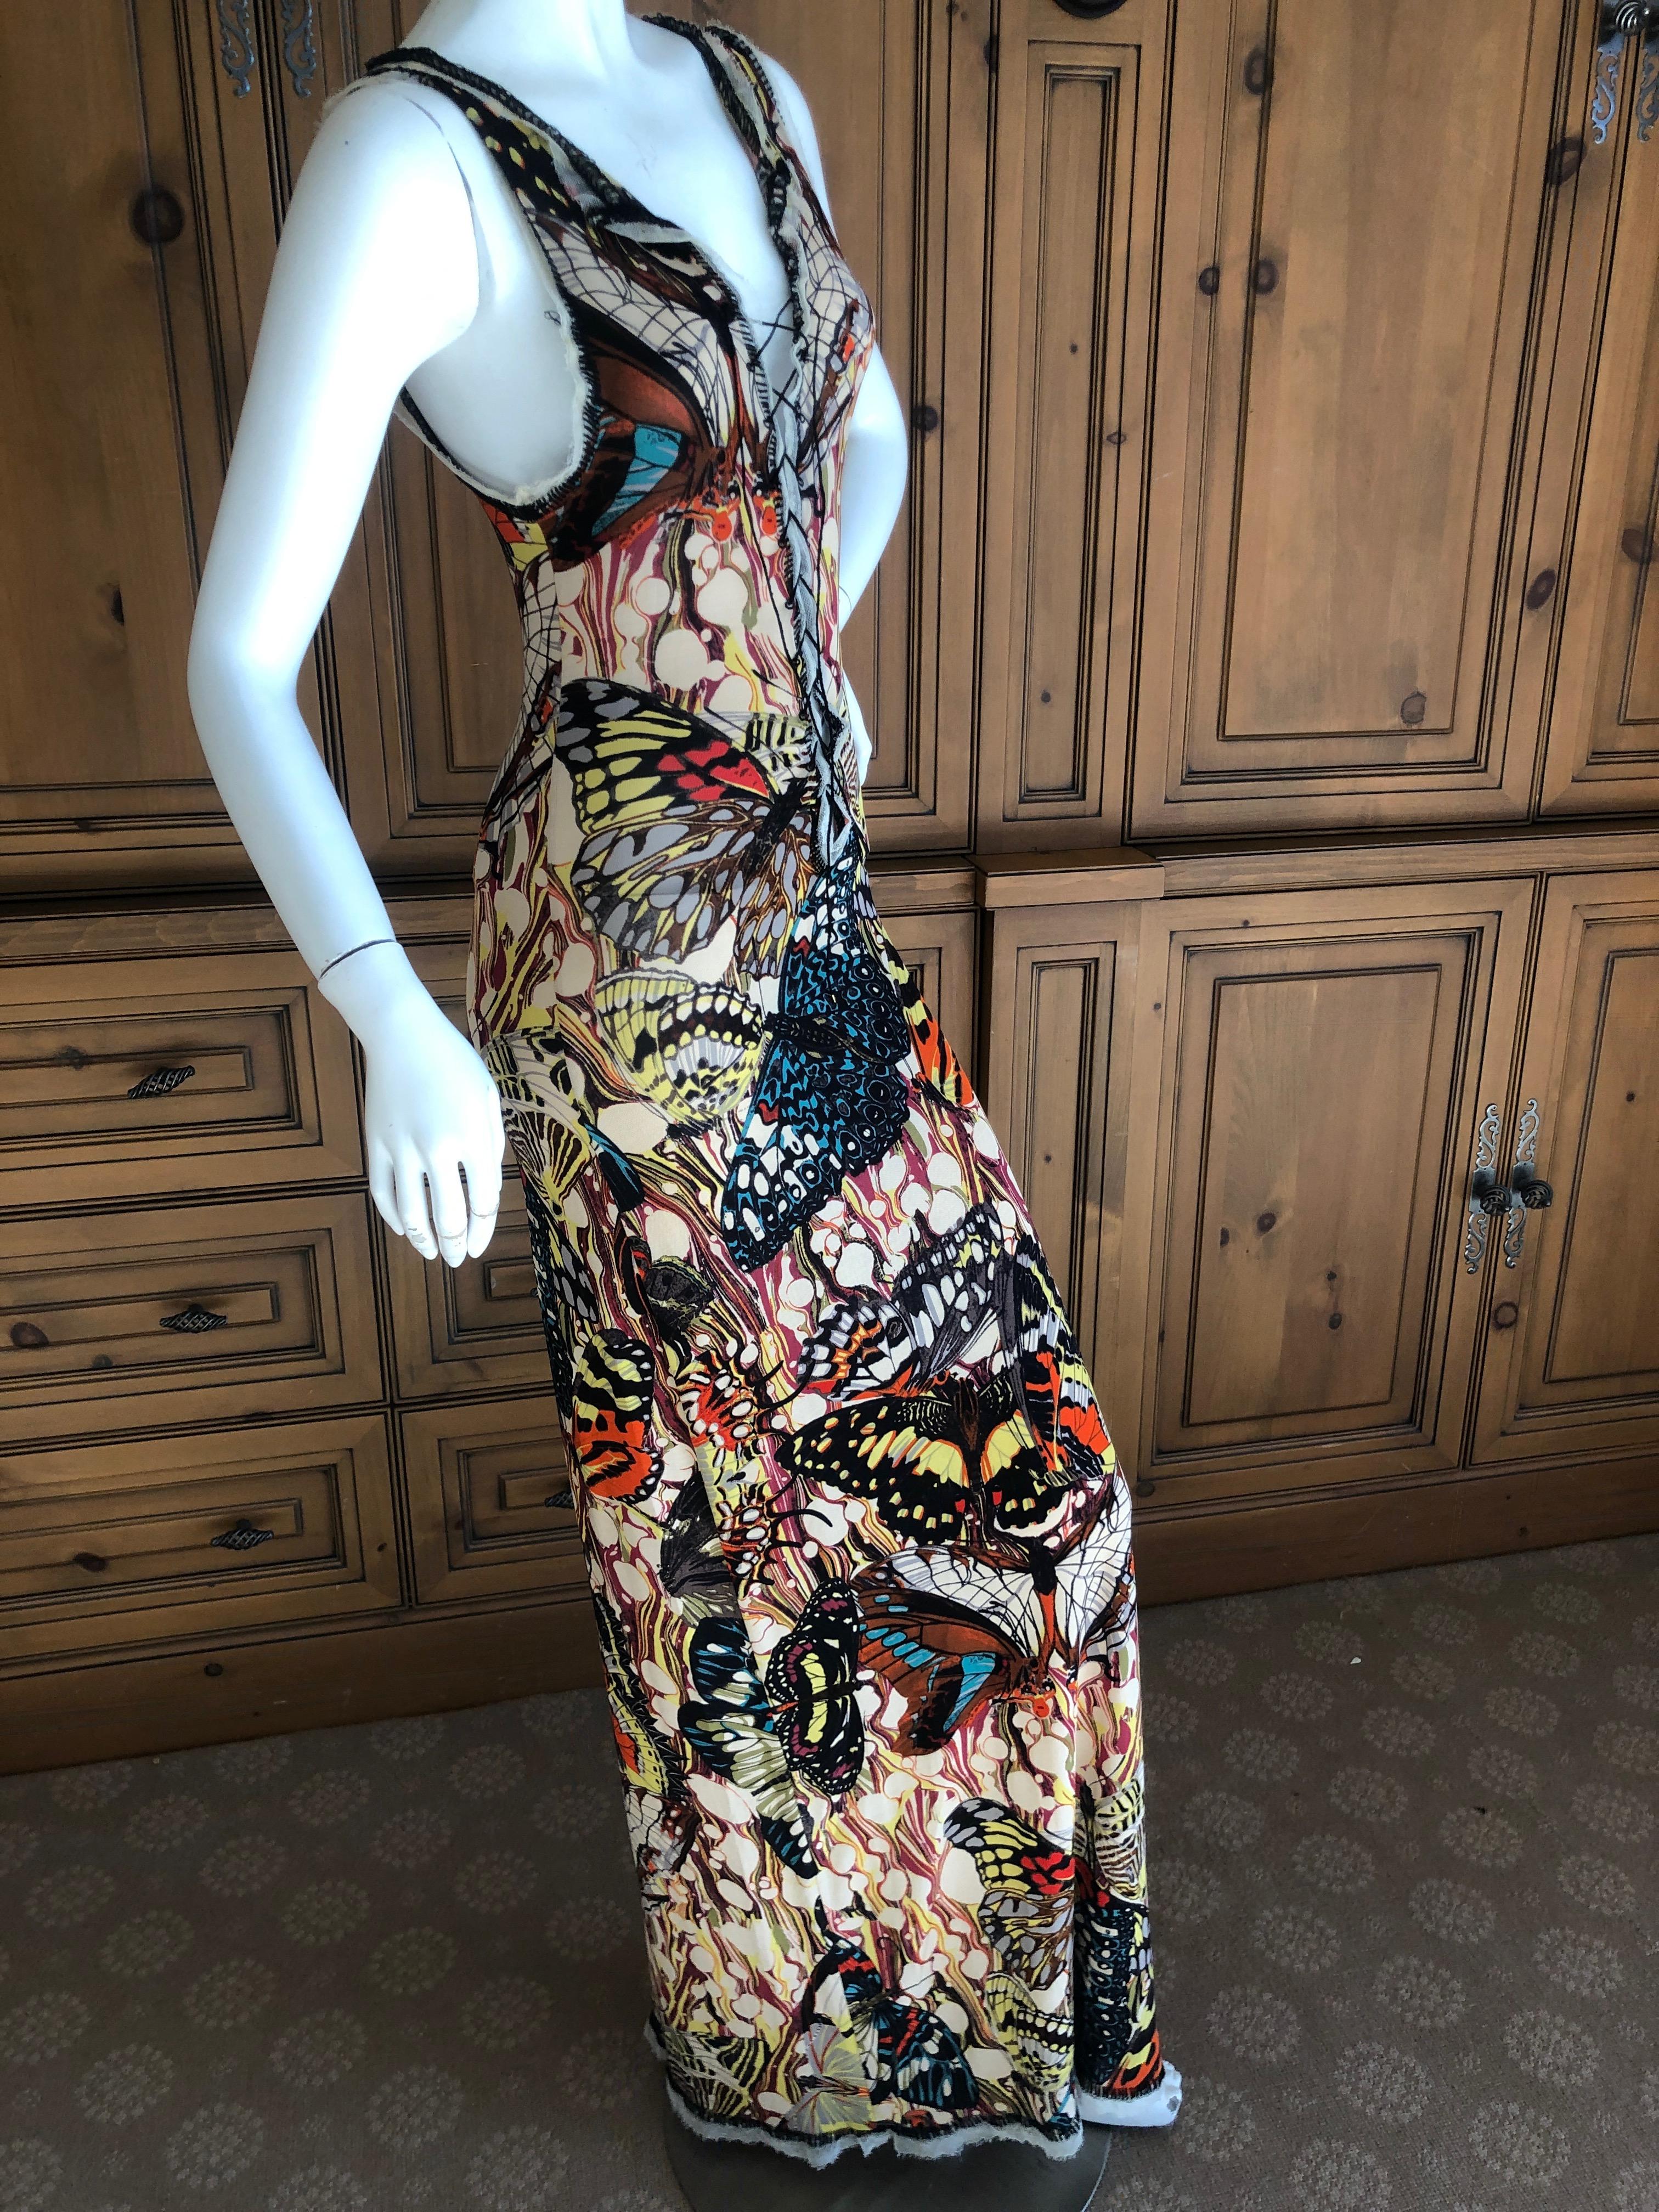 Jean Paul Gaultier Maille Feme Low Cut Butterfly Print Dress w Lace Up Details.
Created by Fuzzi, this is much prettier in person.
Size L
Bust 34